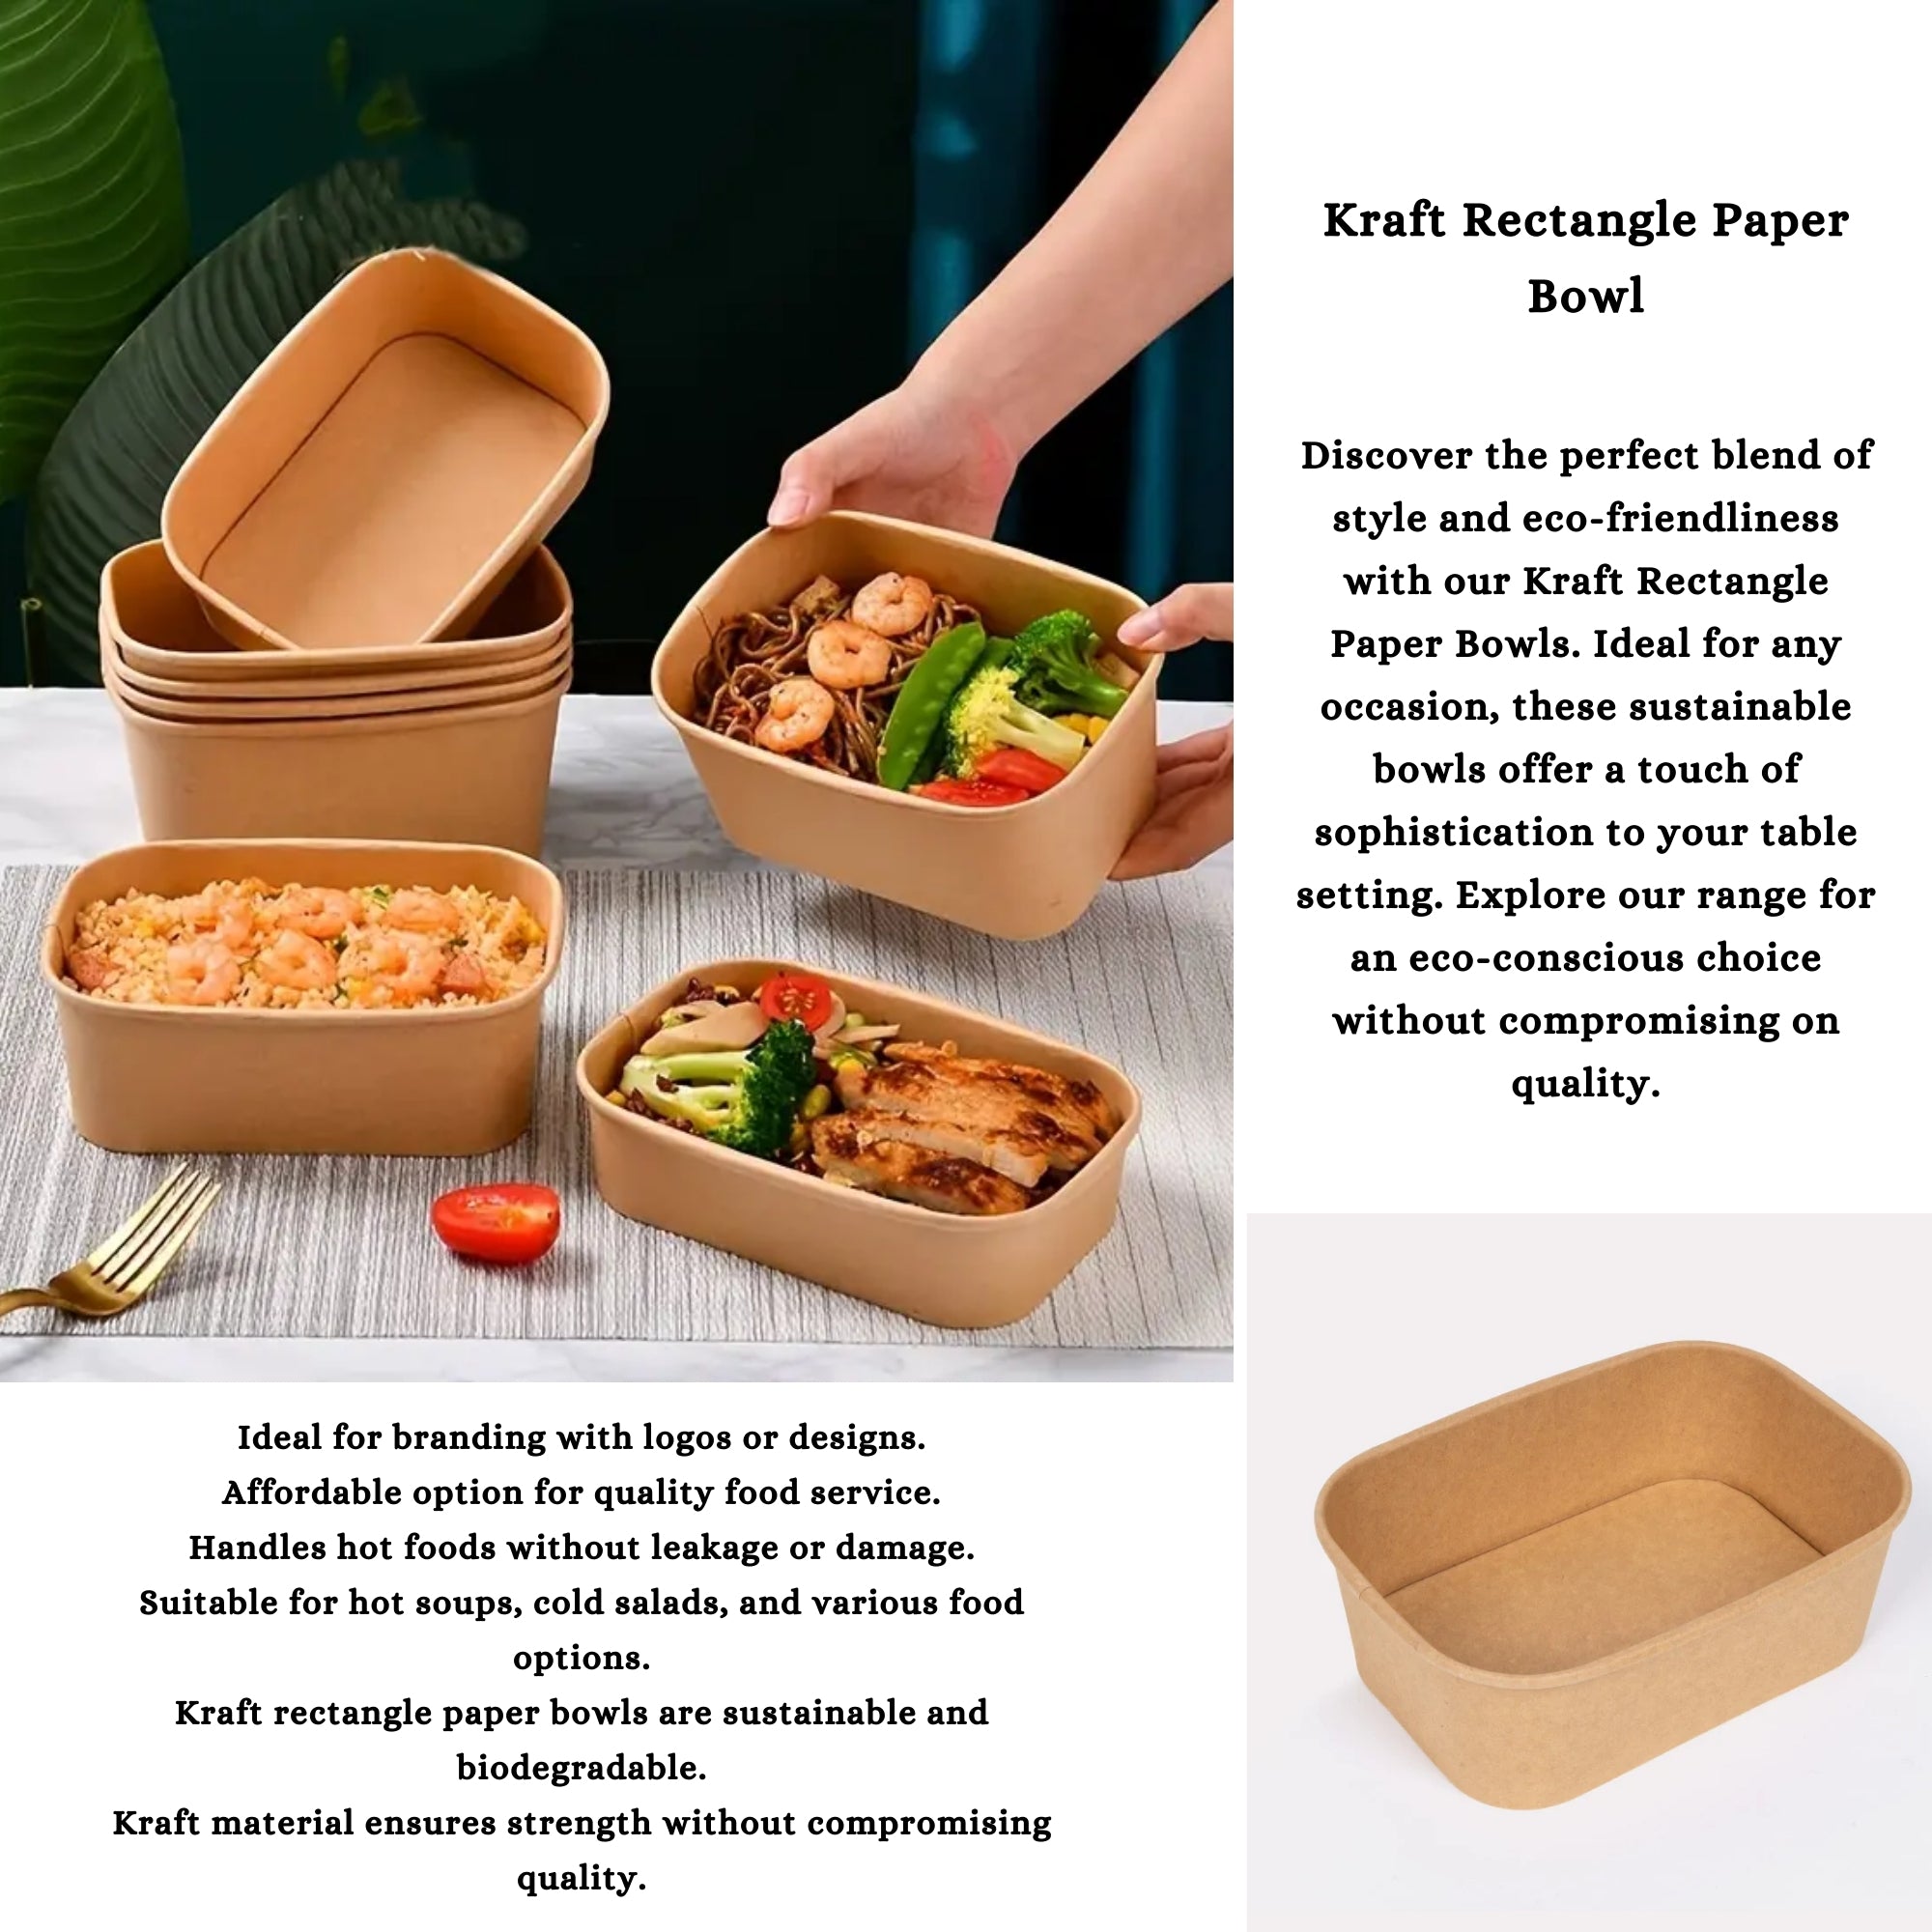 Rectangle Paper Bowls, Ecosmart, sustainable, brown paper, disposable, affordable, Leak resistant, kraft paper, macaroni, salad, bulk pack, frozen treats, shops, diners, restaurants, food trucks, bakeries, Multi-Purpose, high-quality, avoid leaks, spills, pulp, durable, occasion, dinnerware, microwavable, food safe, meal prep, catering supplies, Packaging, takeout, deliveries, customized, sophistication, personalize, freshness, Compostable Fiber, renewable, biodegradable